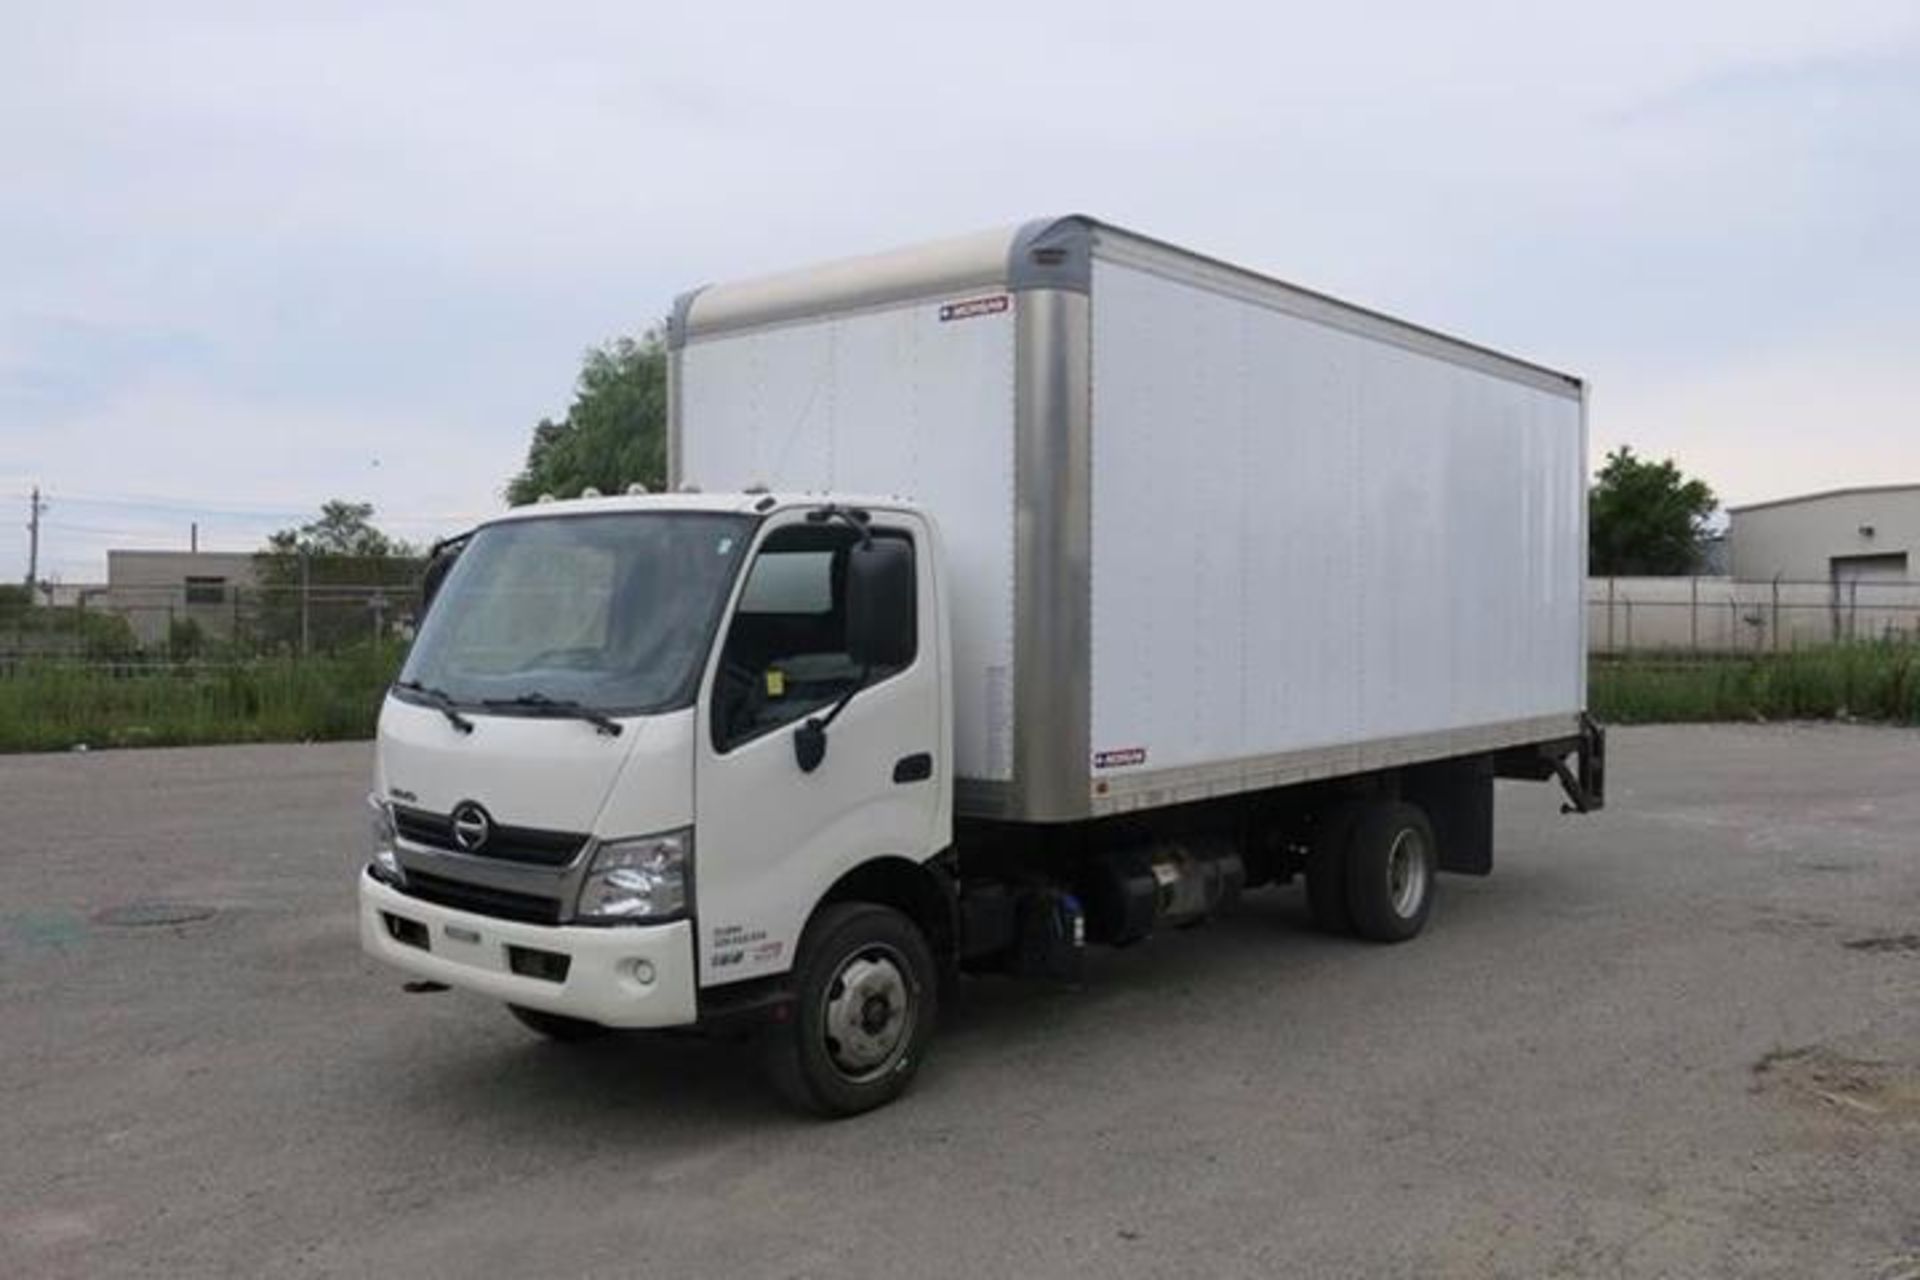 HINO 195, 20’, BOX TRUCK WITH POWER TAILGATE, BOX DIMENSIONS (20’ LONG X 7’8” WIDE, 7’8” HIGH)